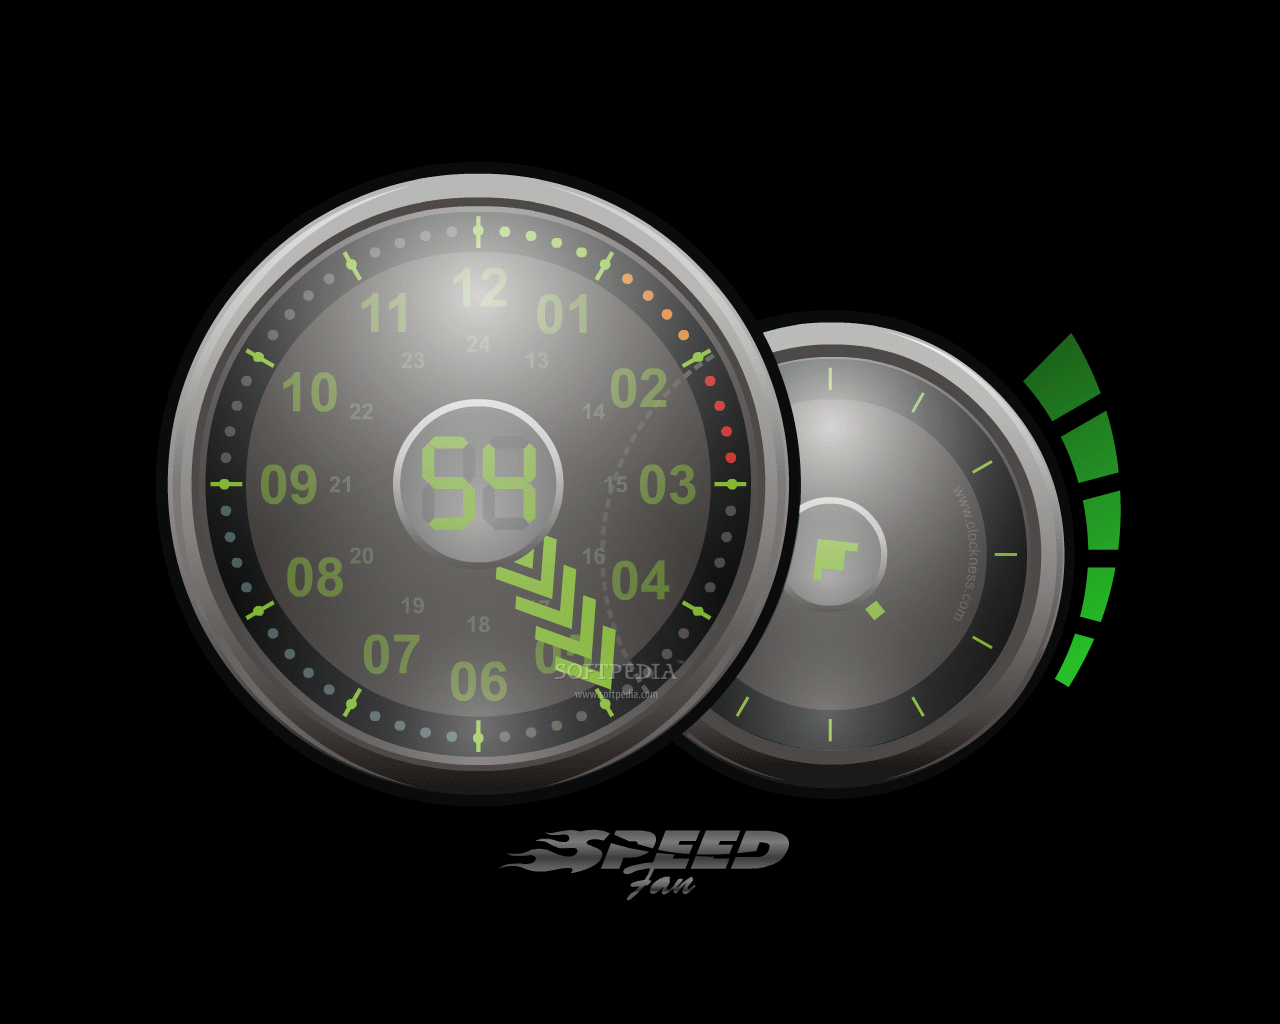 Speed Fan Clock Screensaver screenshot 2 - This is the way Speed Fan Clock Screensaver will look like on your computer screen, whenever you are on a break.